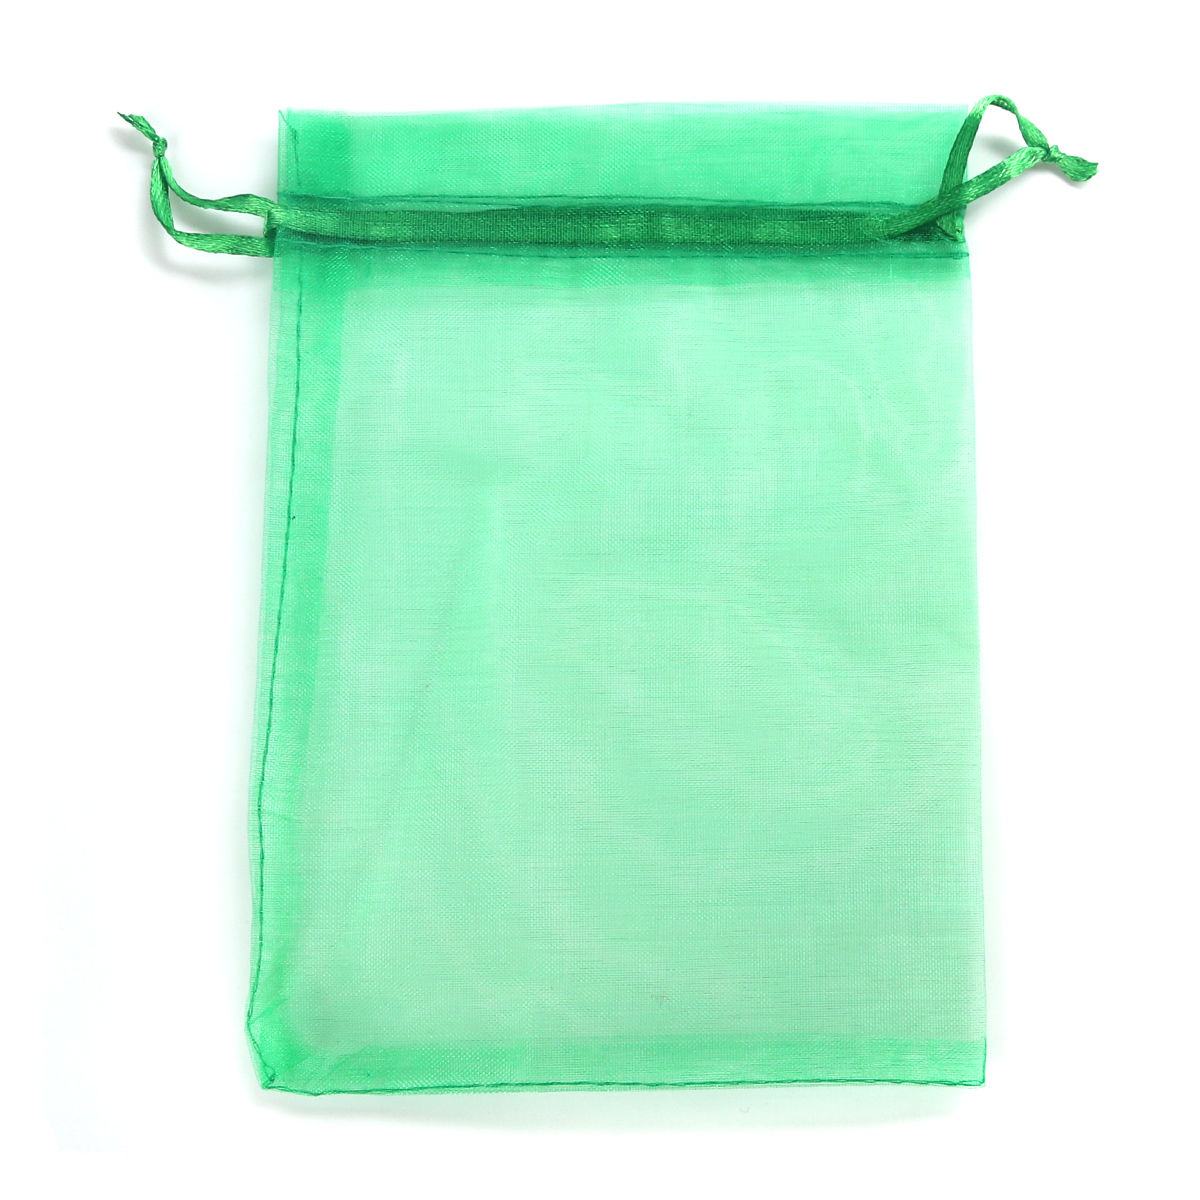 Picture of Wedding Gift Organza Jewelry Bags Drawstring Rectangle Dark Green (Usable Space: 15.5x12.5cm) 18cm x 12.8cm, 20 PCs